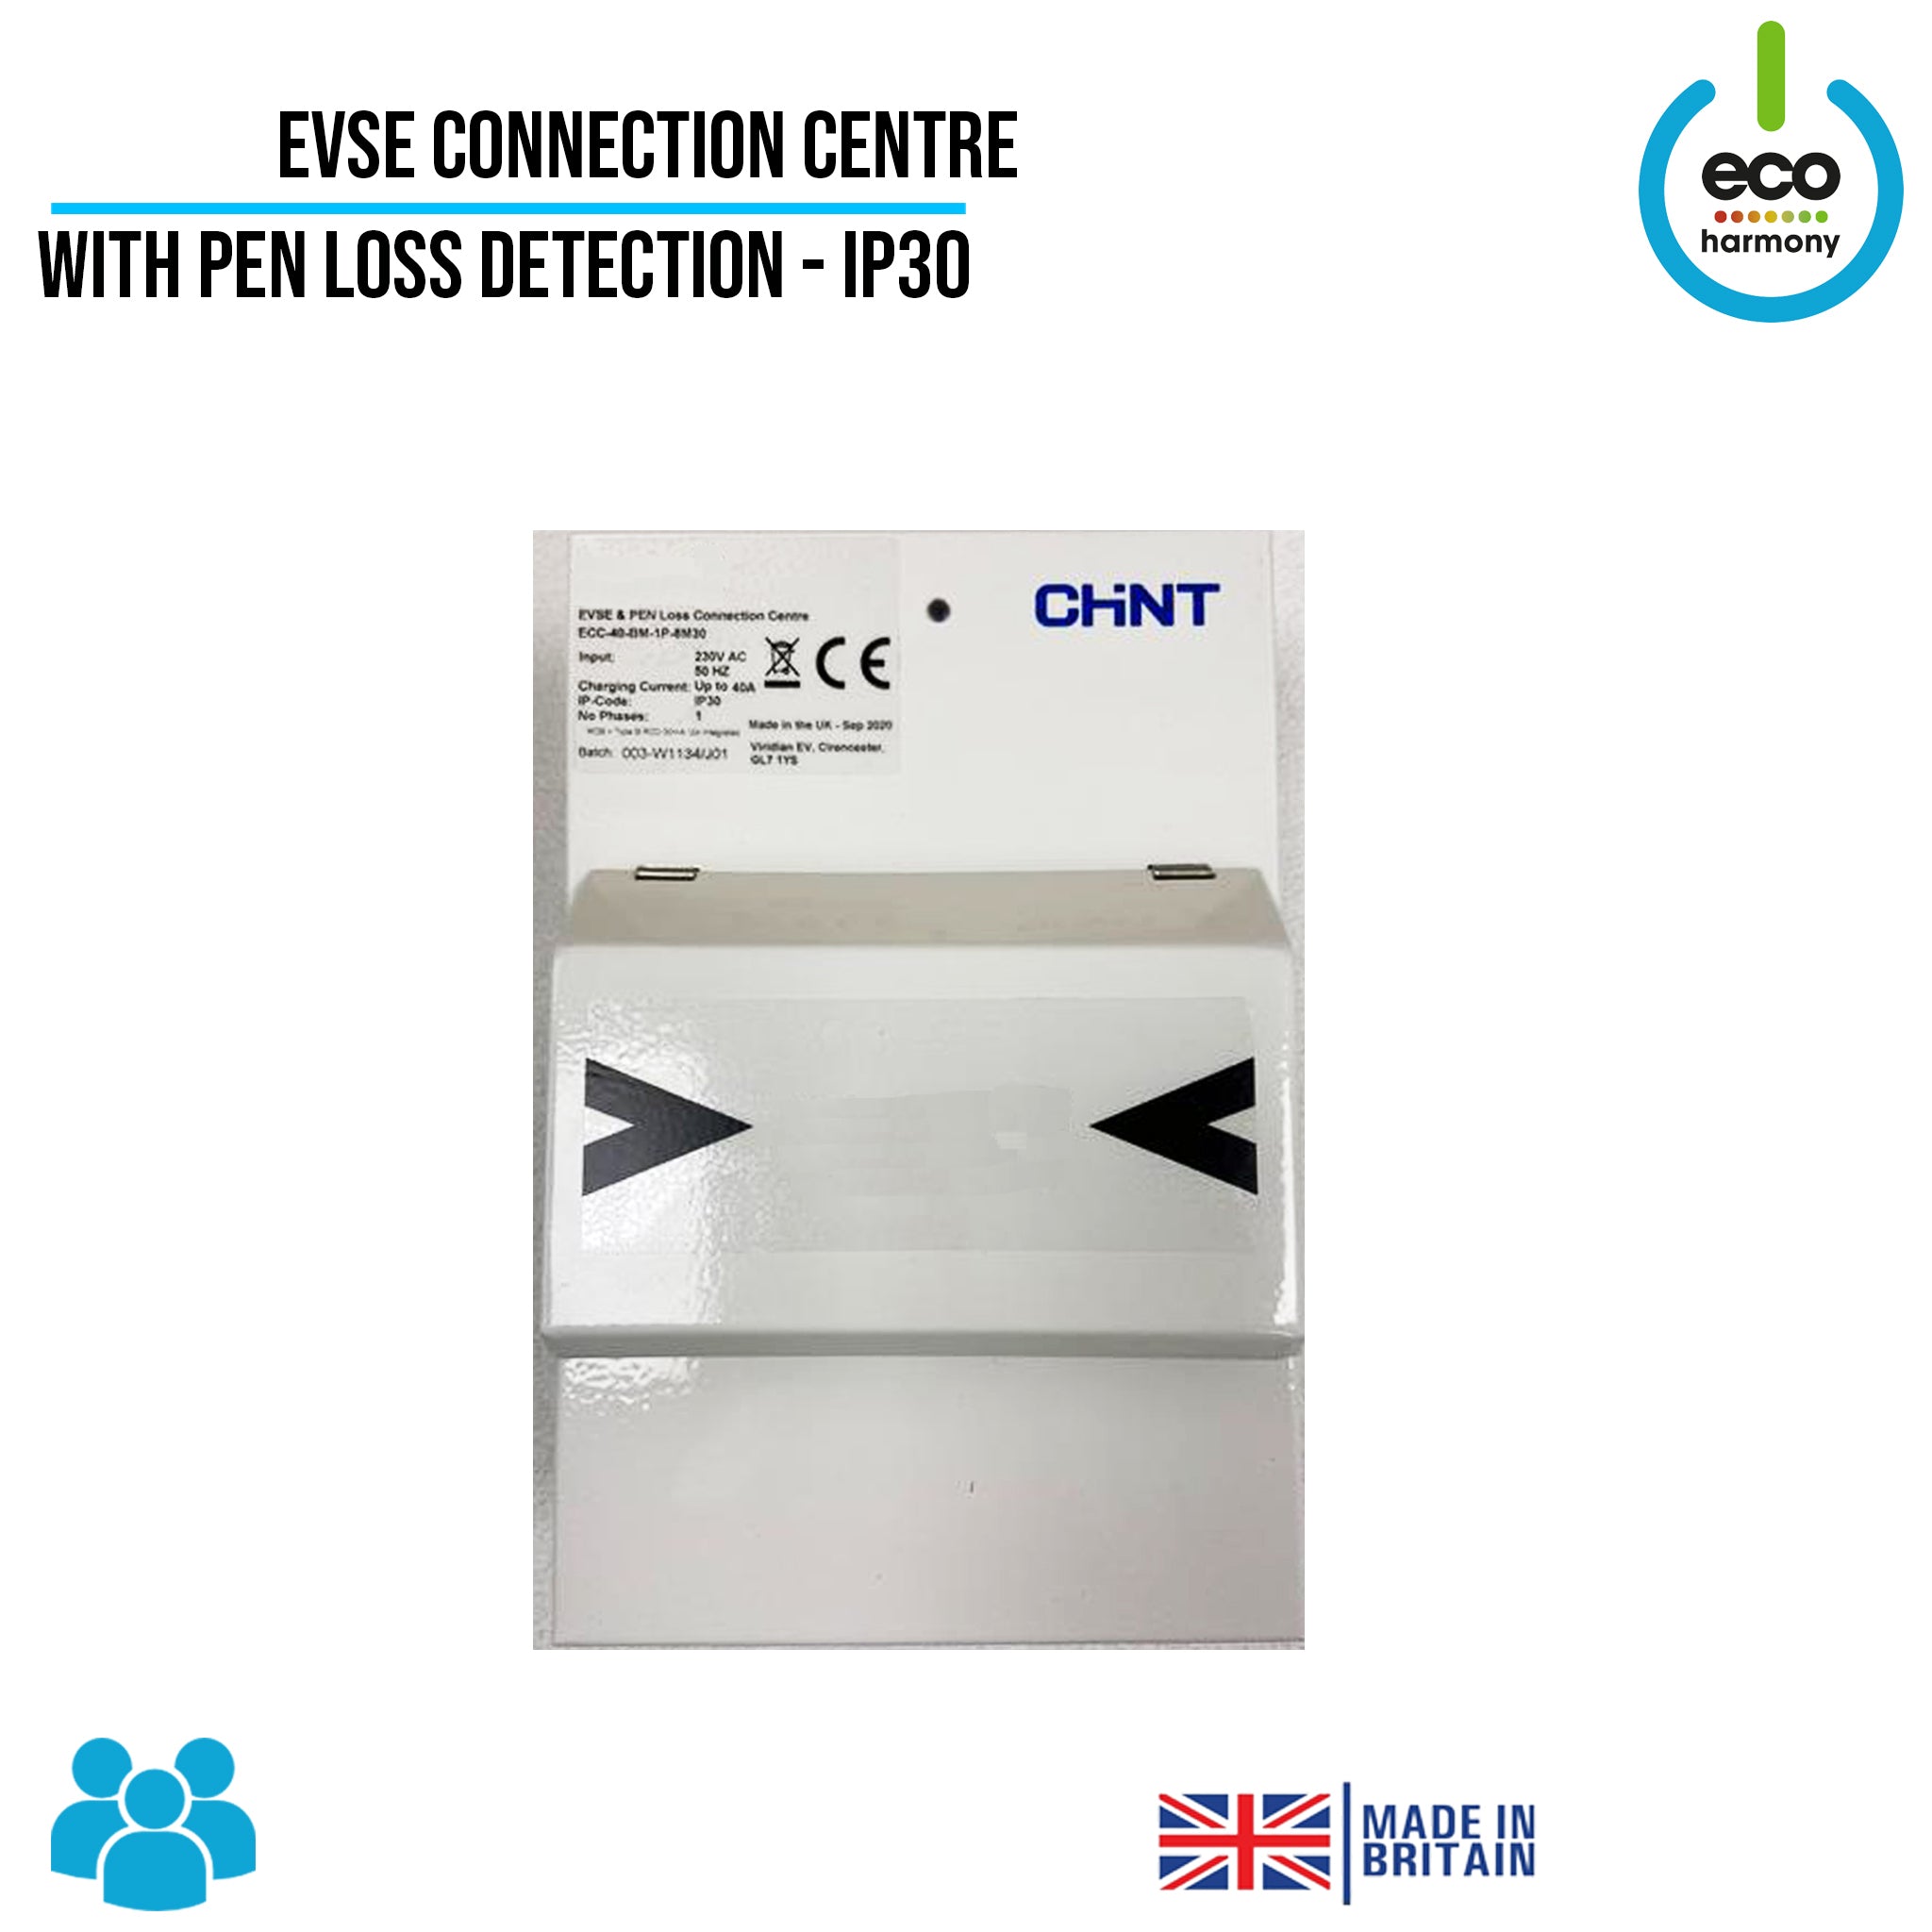 EVSE Connection Centre with PEN Loss detection - IP30